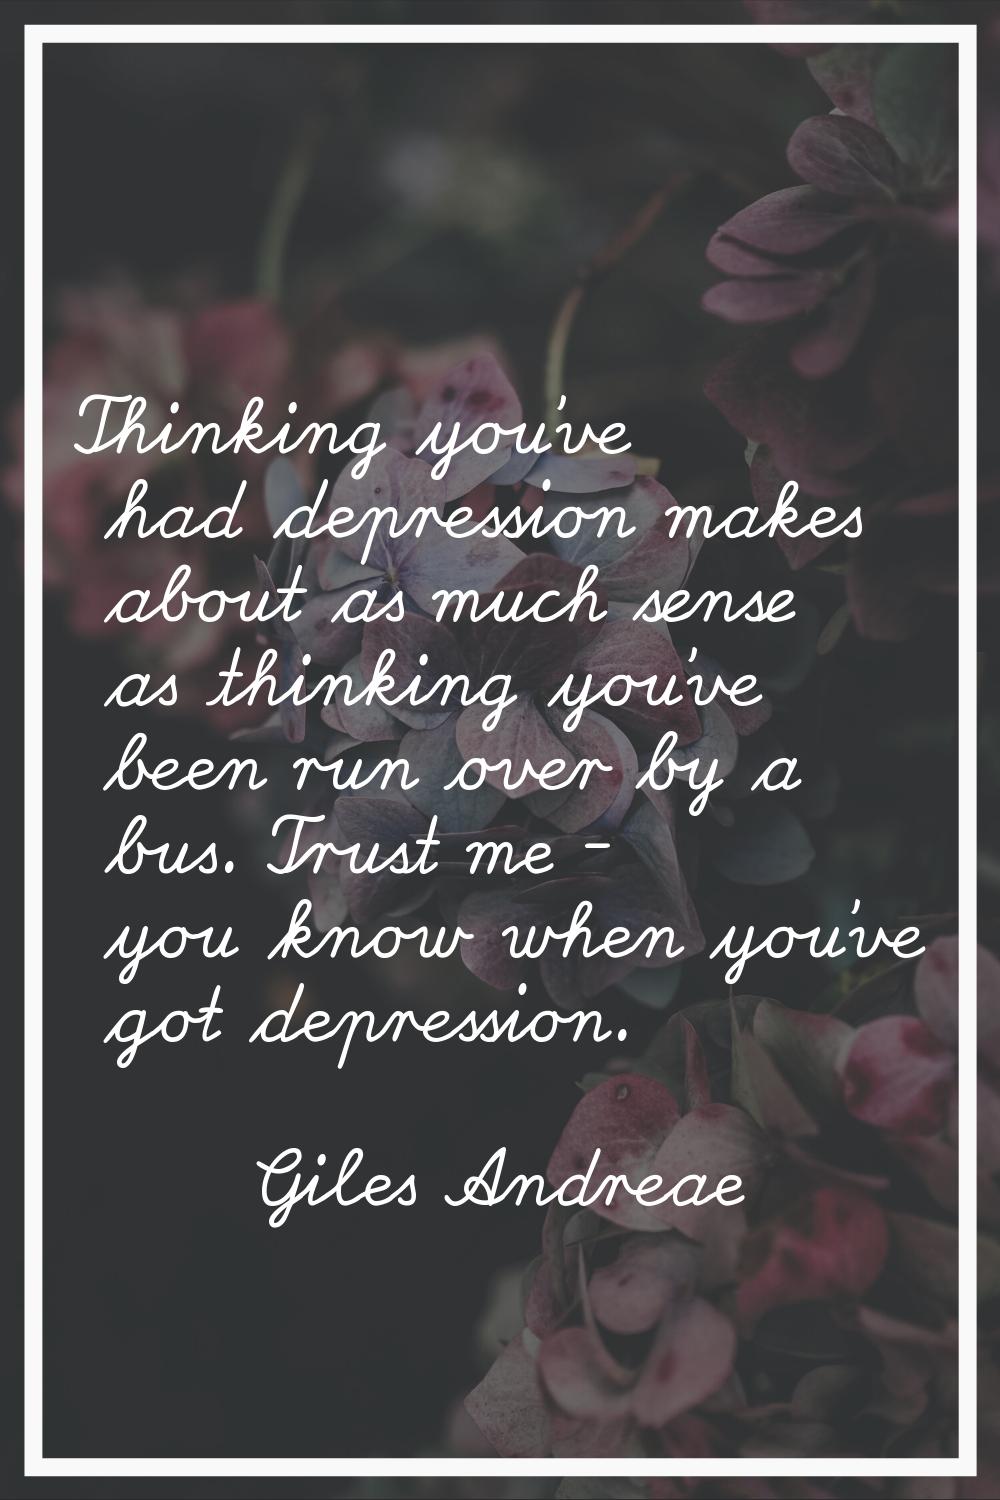 Thinking you've had depression makes about as much sense as thinking you've been run over by a bus.